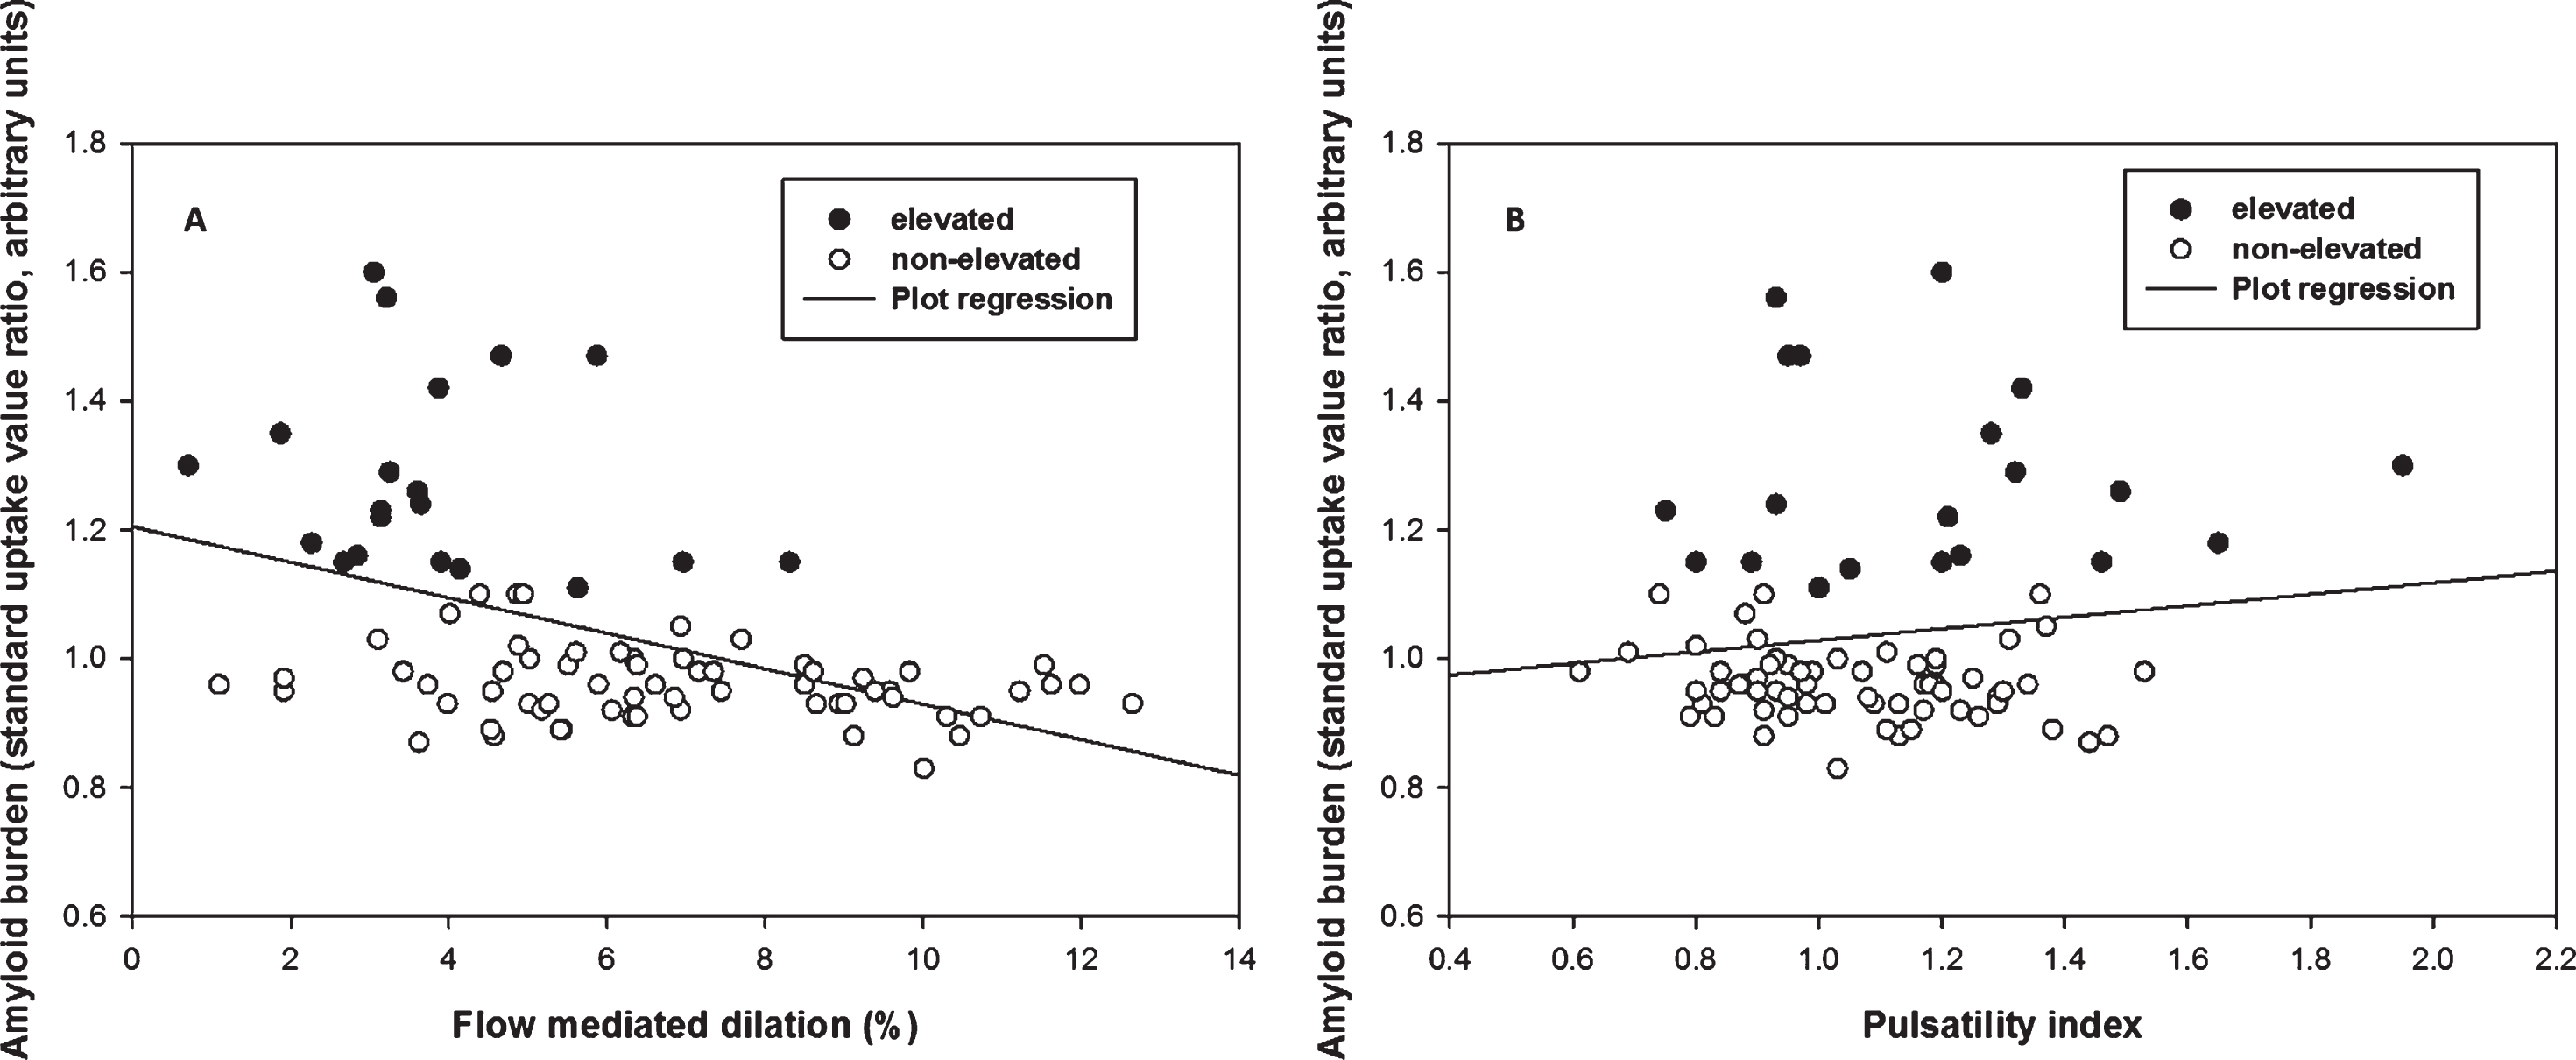 Multiple linear regression of flow mediated dilation (FMD) and pulsatility index (PI) against Aβ burden. A) There was a negative correlation between FMD and Aβ burden across groups (p < 0.001, β= –0.03) after adjusting age, sex, and cardiovascular risk. B) There was no significant correlation between PI and Aβ burden across groups (p = 0.415) after adjusting age, sex, and cardiovascular risk.